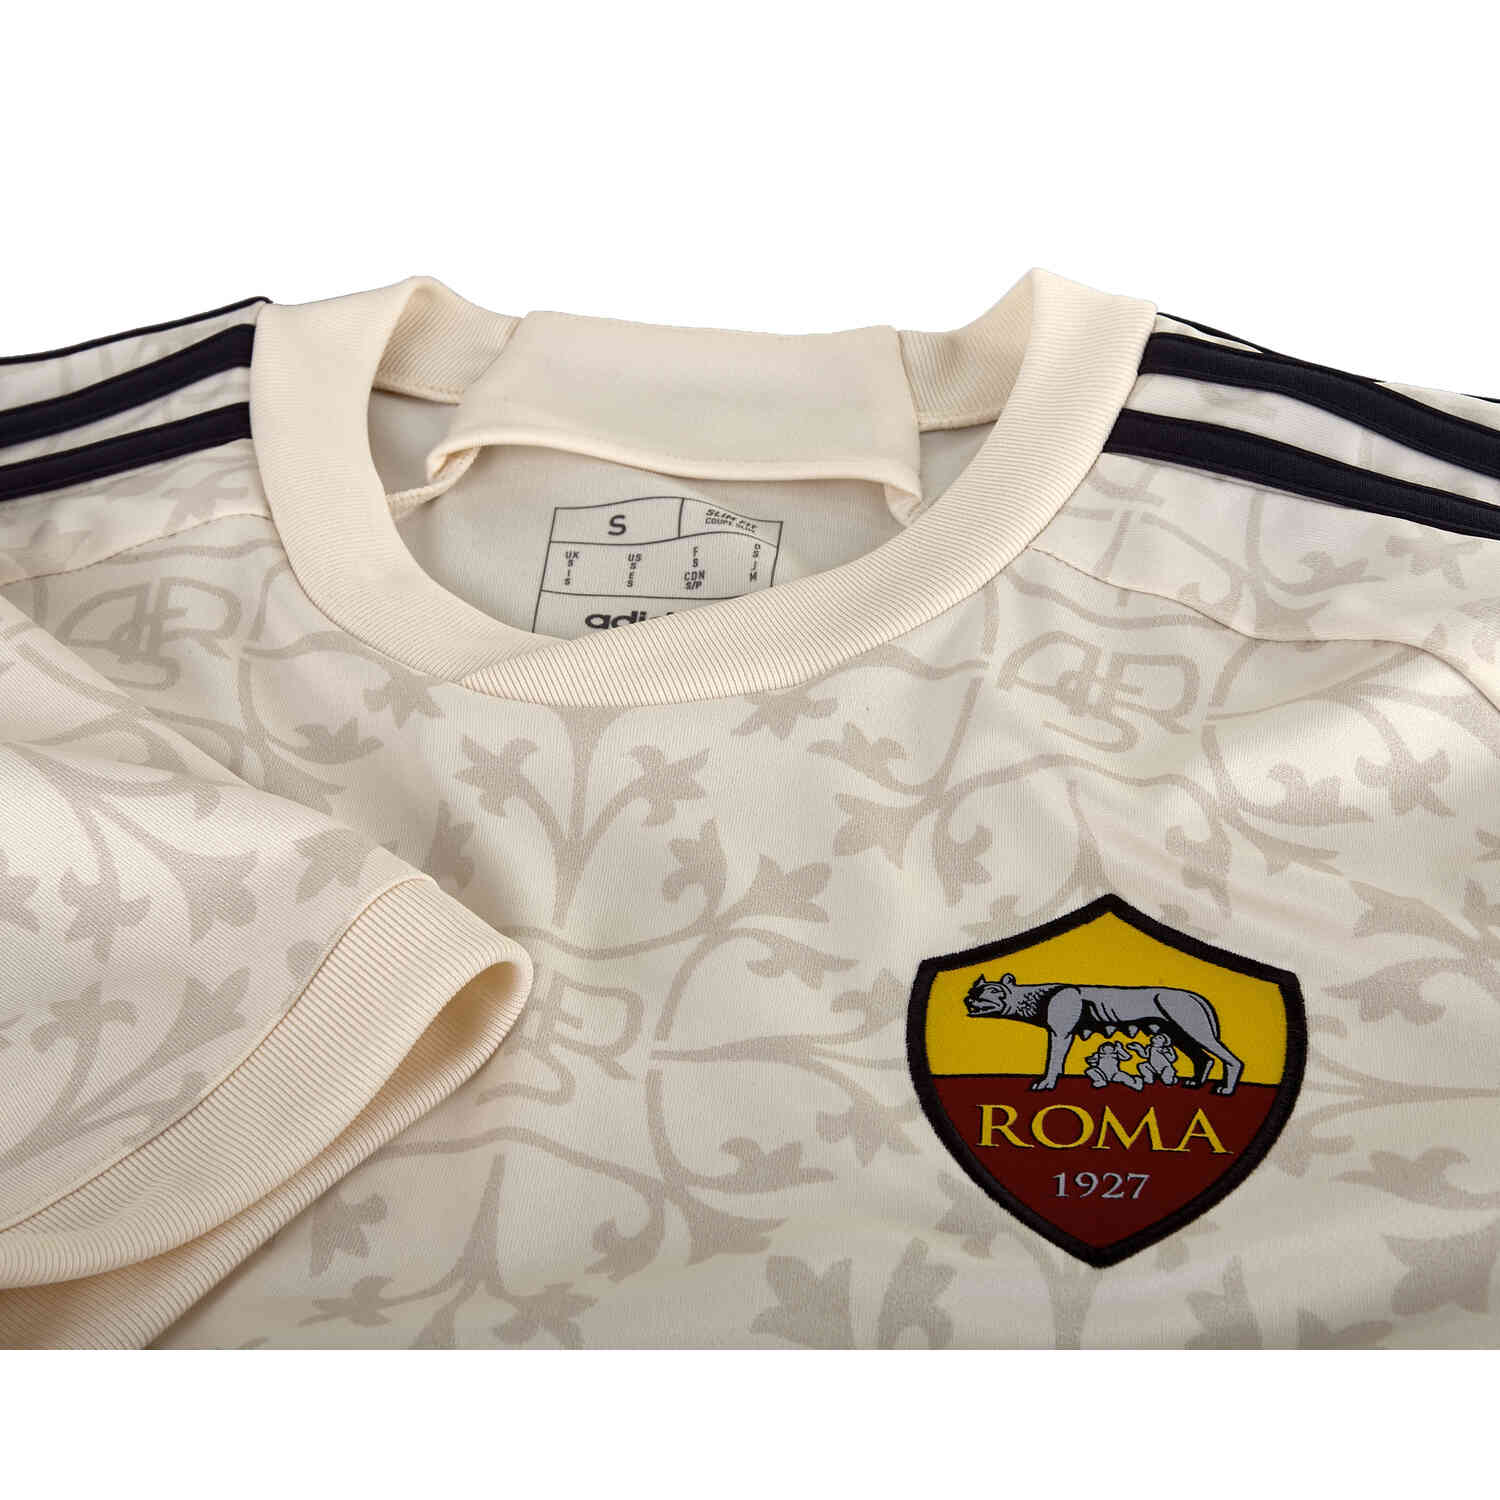 AS Roma unveils new 2023-24 adidas away kit with a nod to the marble motifs  of the Eternal City